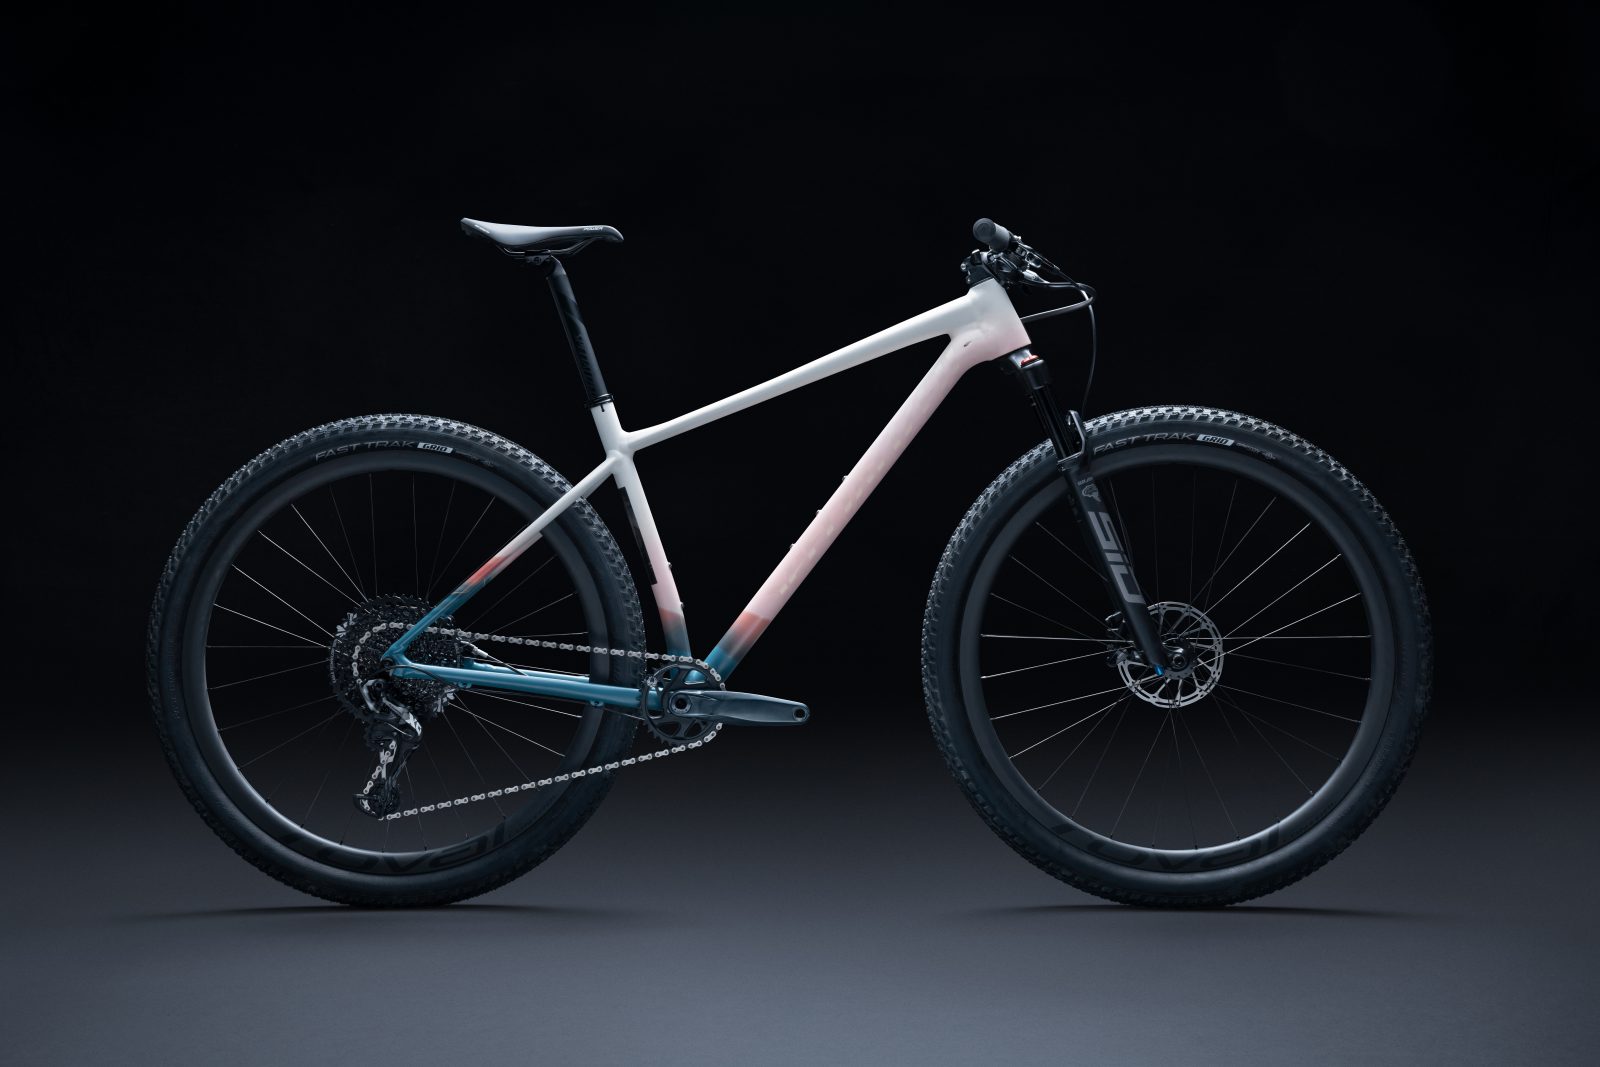 Specialized Launches the New Limited Edition Chisel Frameset